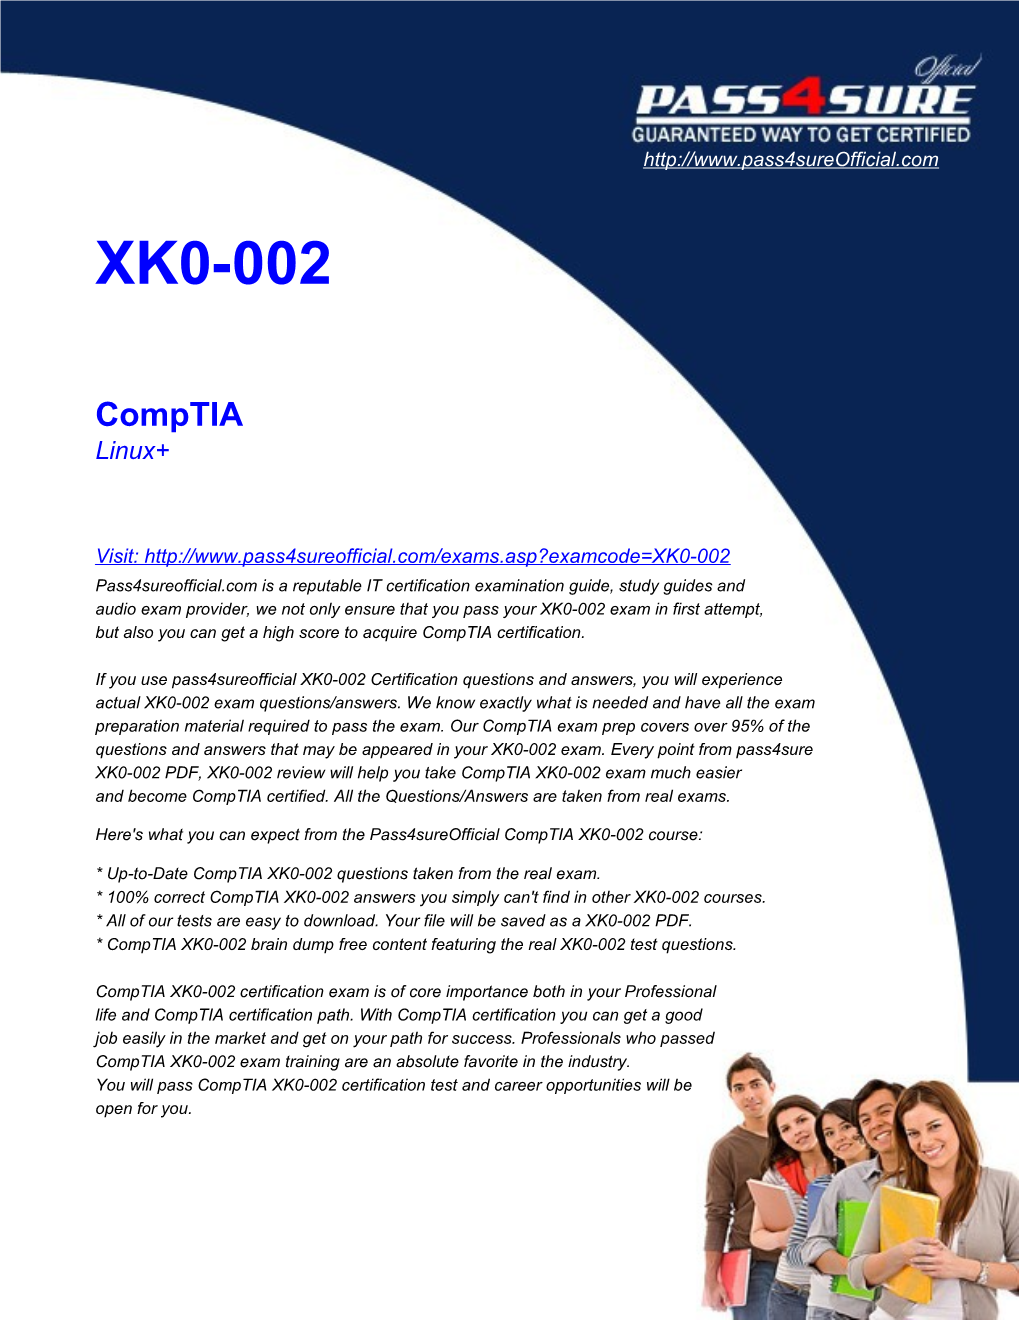 * Up-To-Date Comptia XK0-002 Questions Taken from the Real Exam